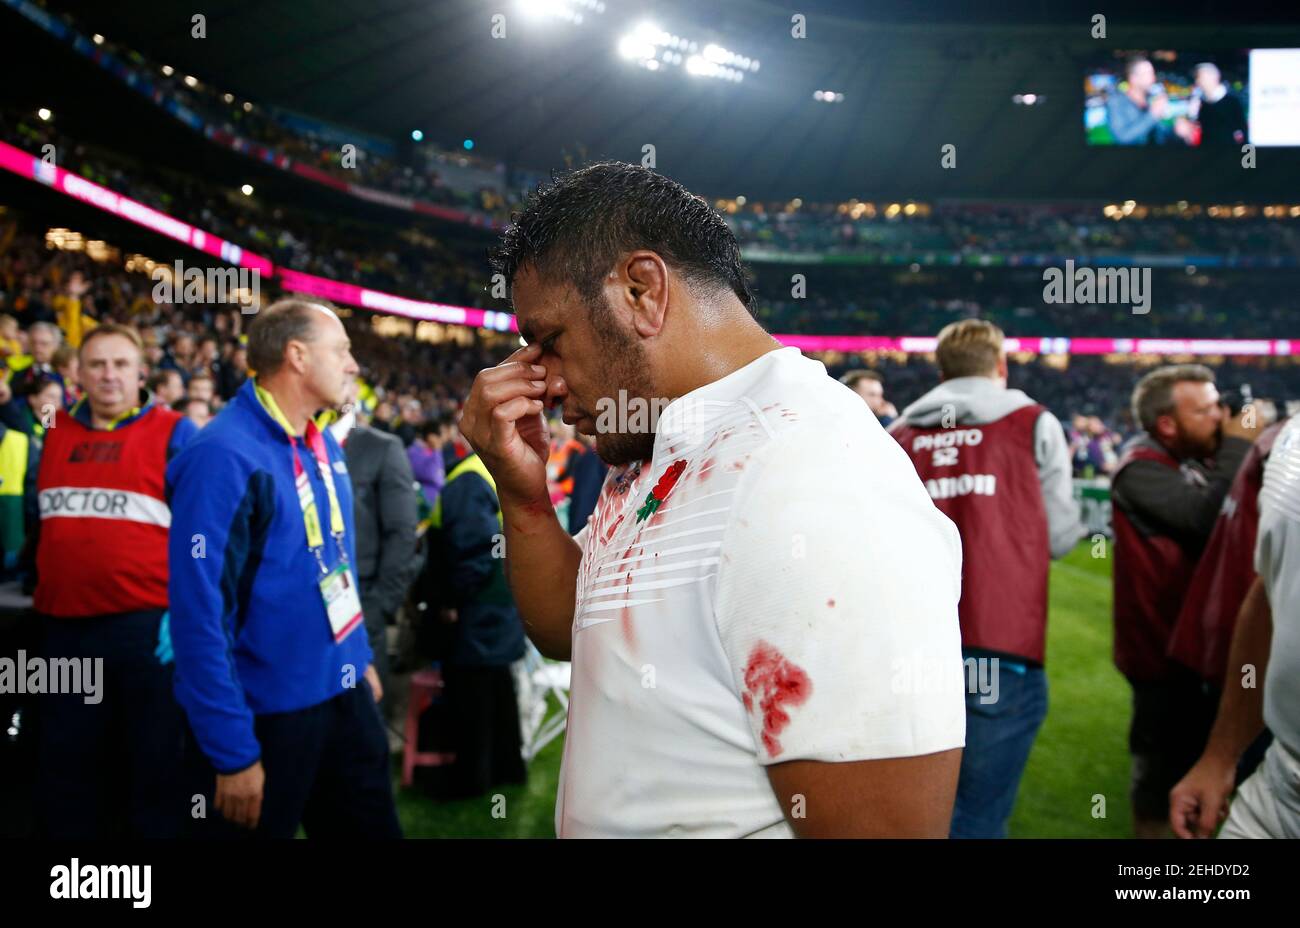 Rugby Union - England v Australia - IRB Rugby World Cup 2015 Pool A - Twickenham Stadium, London, England - 3/10/15  England's Mako Vunipola looks dejected after the game  Reuters / Eddie Keogh  Livepic Stock Photo